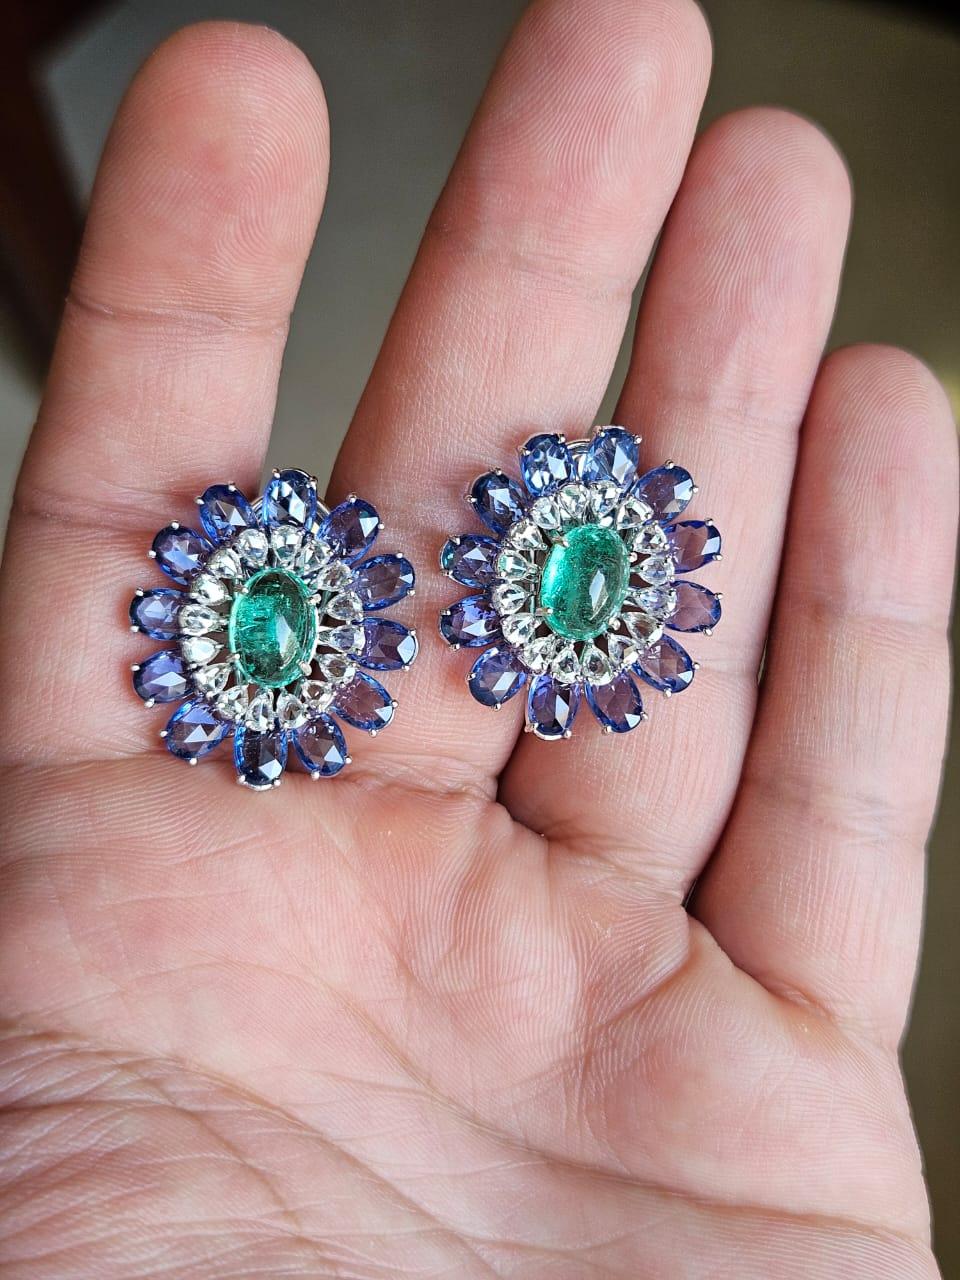 A very gorgeous and beautiful, Emerald & Blue Sapphire Stud Earrings set in 18K White Gold & Diamonds. The weight of the Emerald cabochon is 3.72 carats. The Emeralds are completely natural, without any treatment and are of colombian origin. The